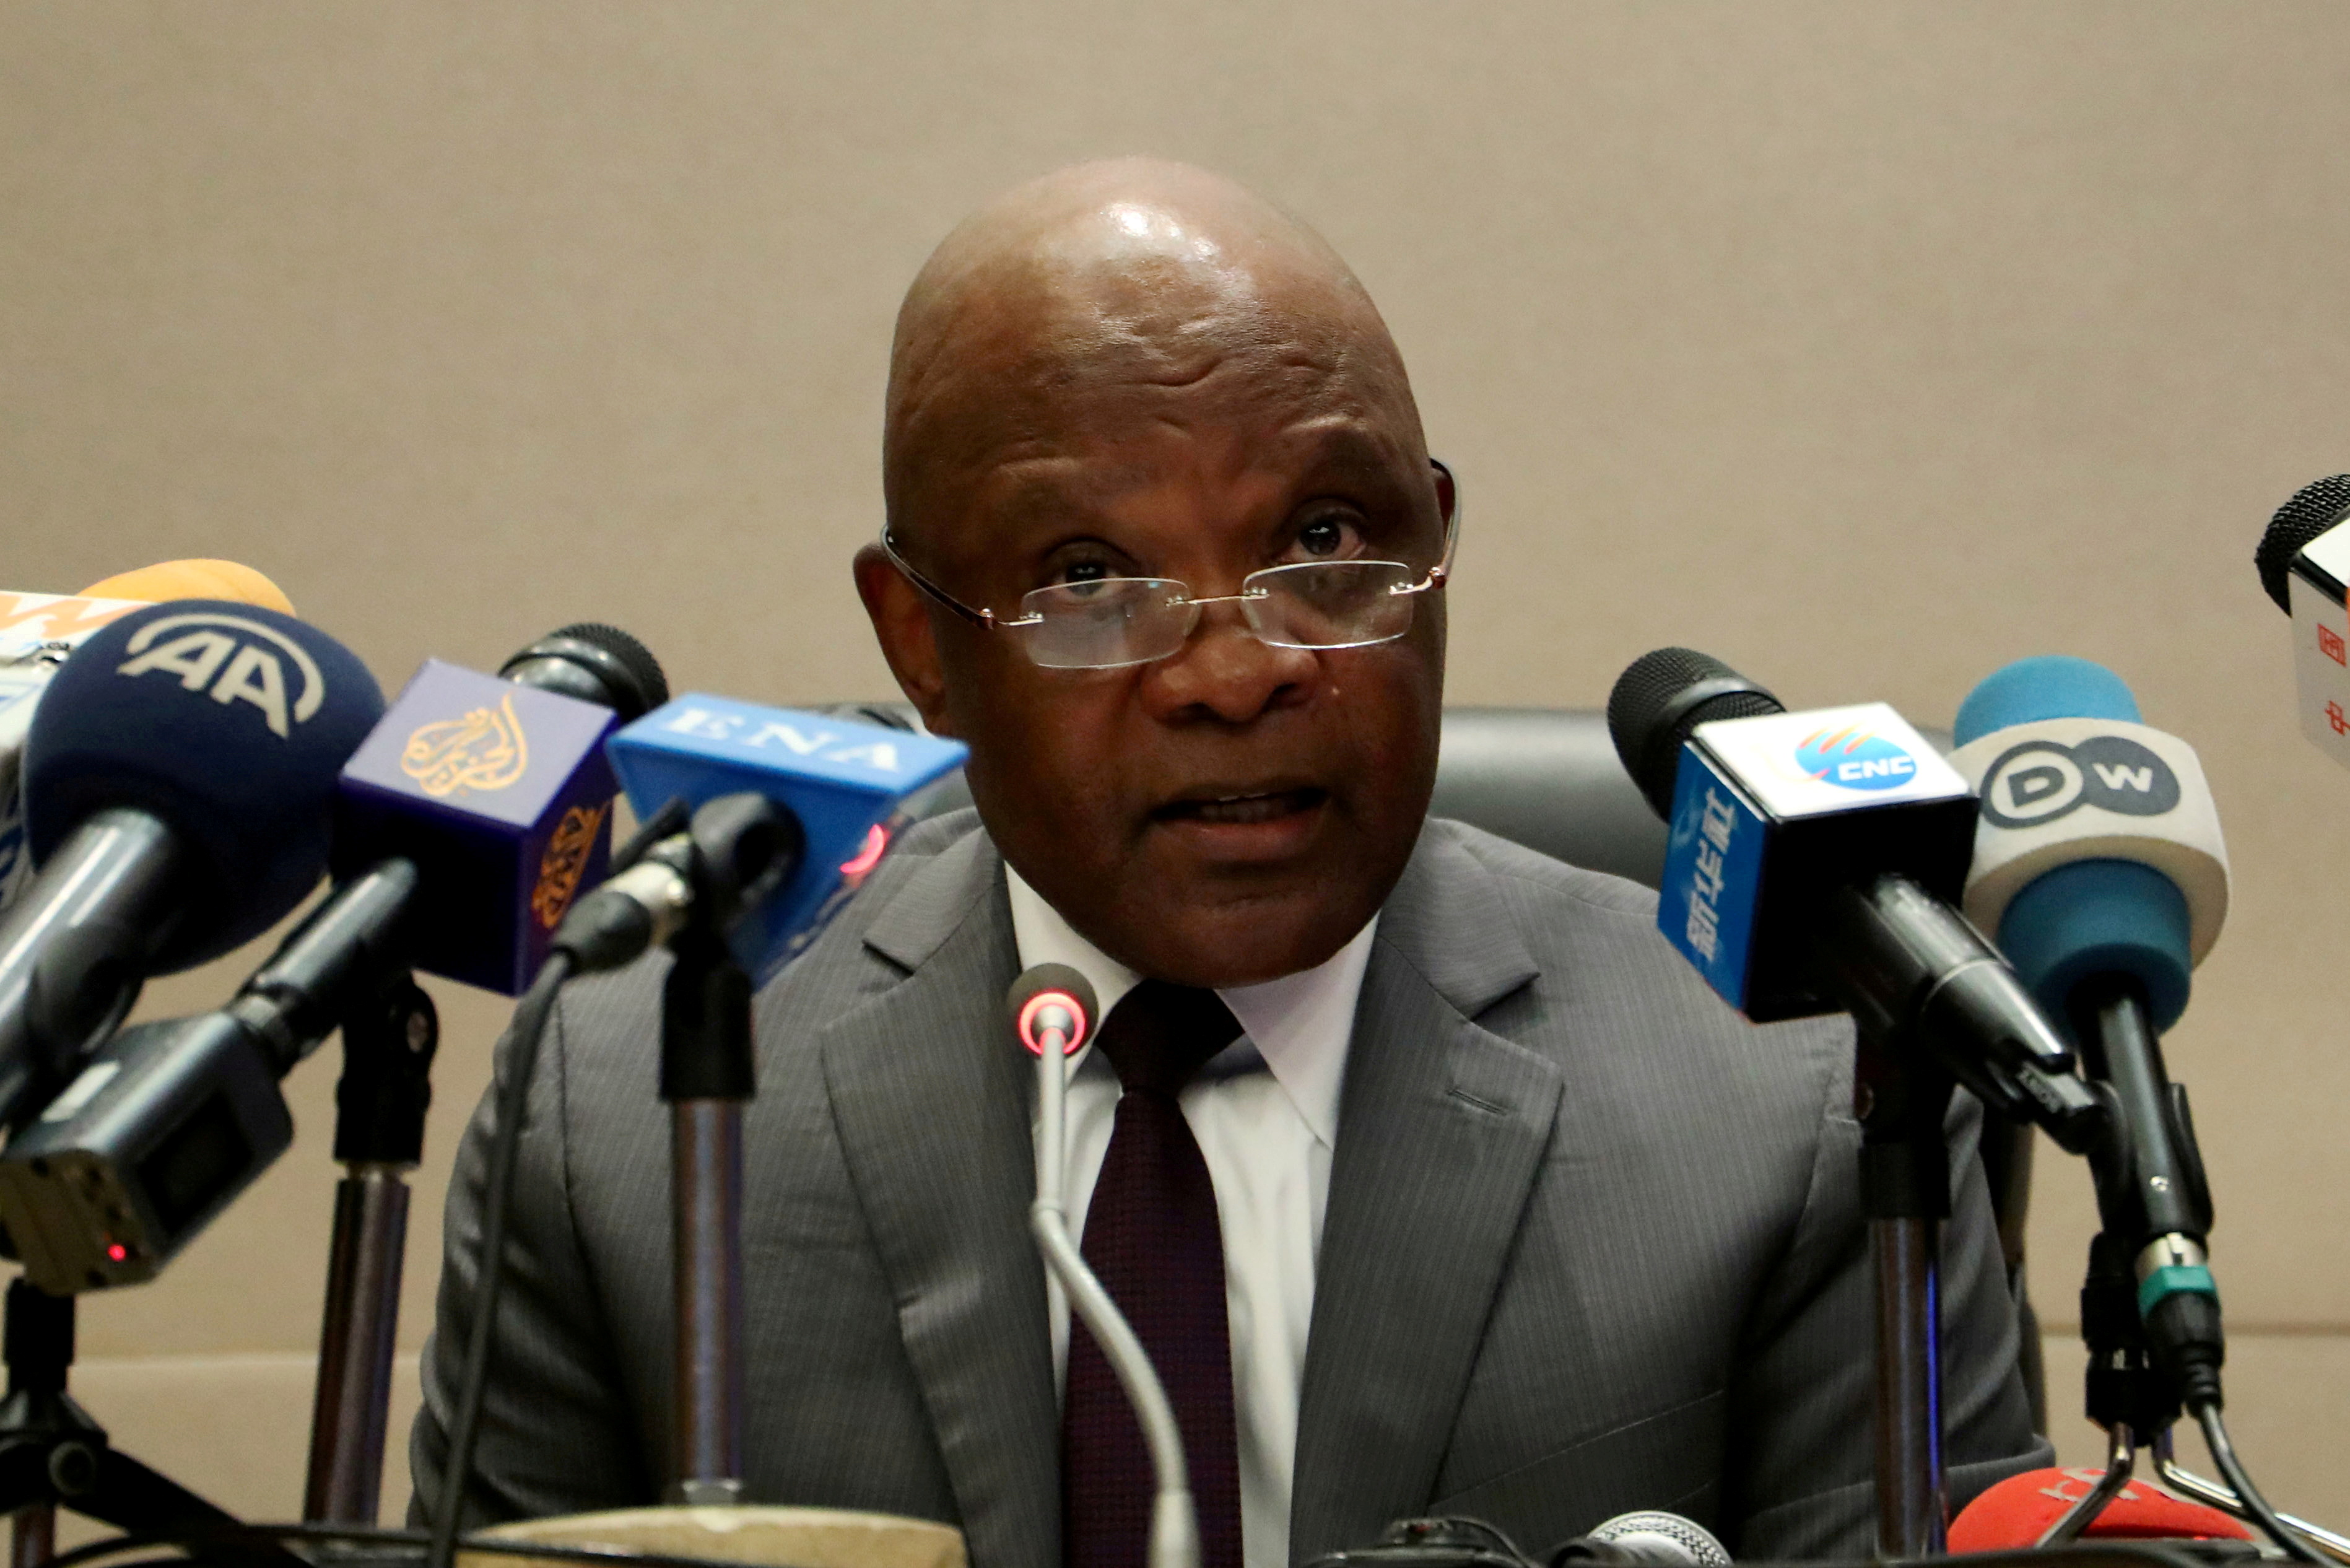 John Nkengasong, director of the African Union's Centers for Disease Control, speaks at a news conference in Addis Ababa, Ethiopia, January 28th, 2020. 